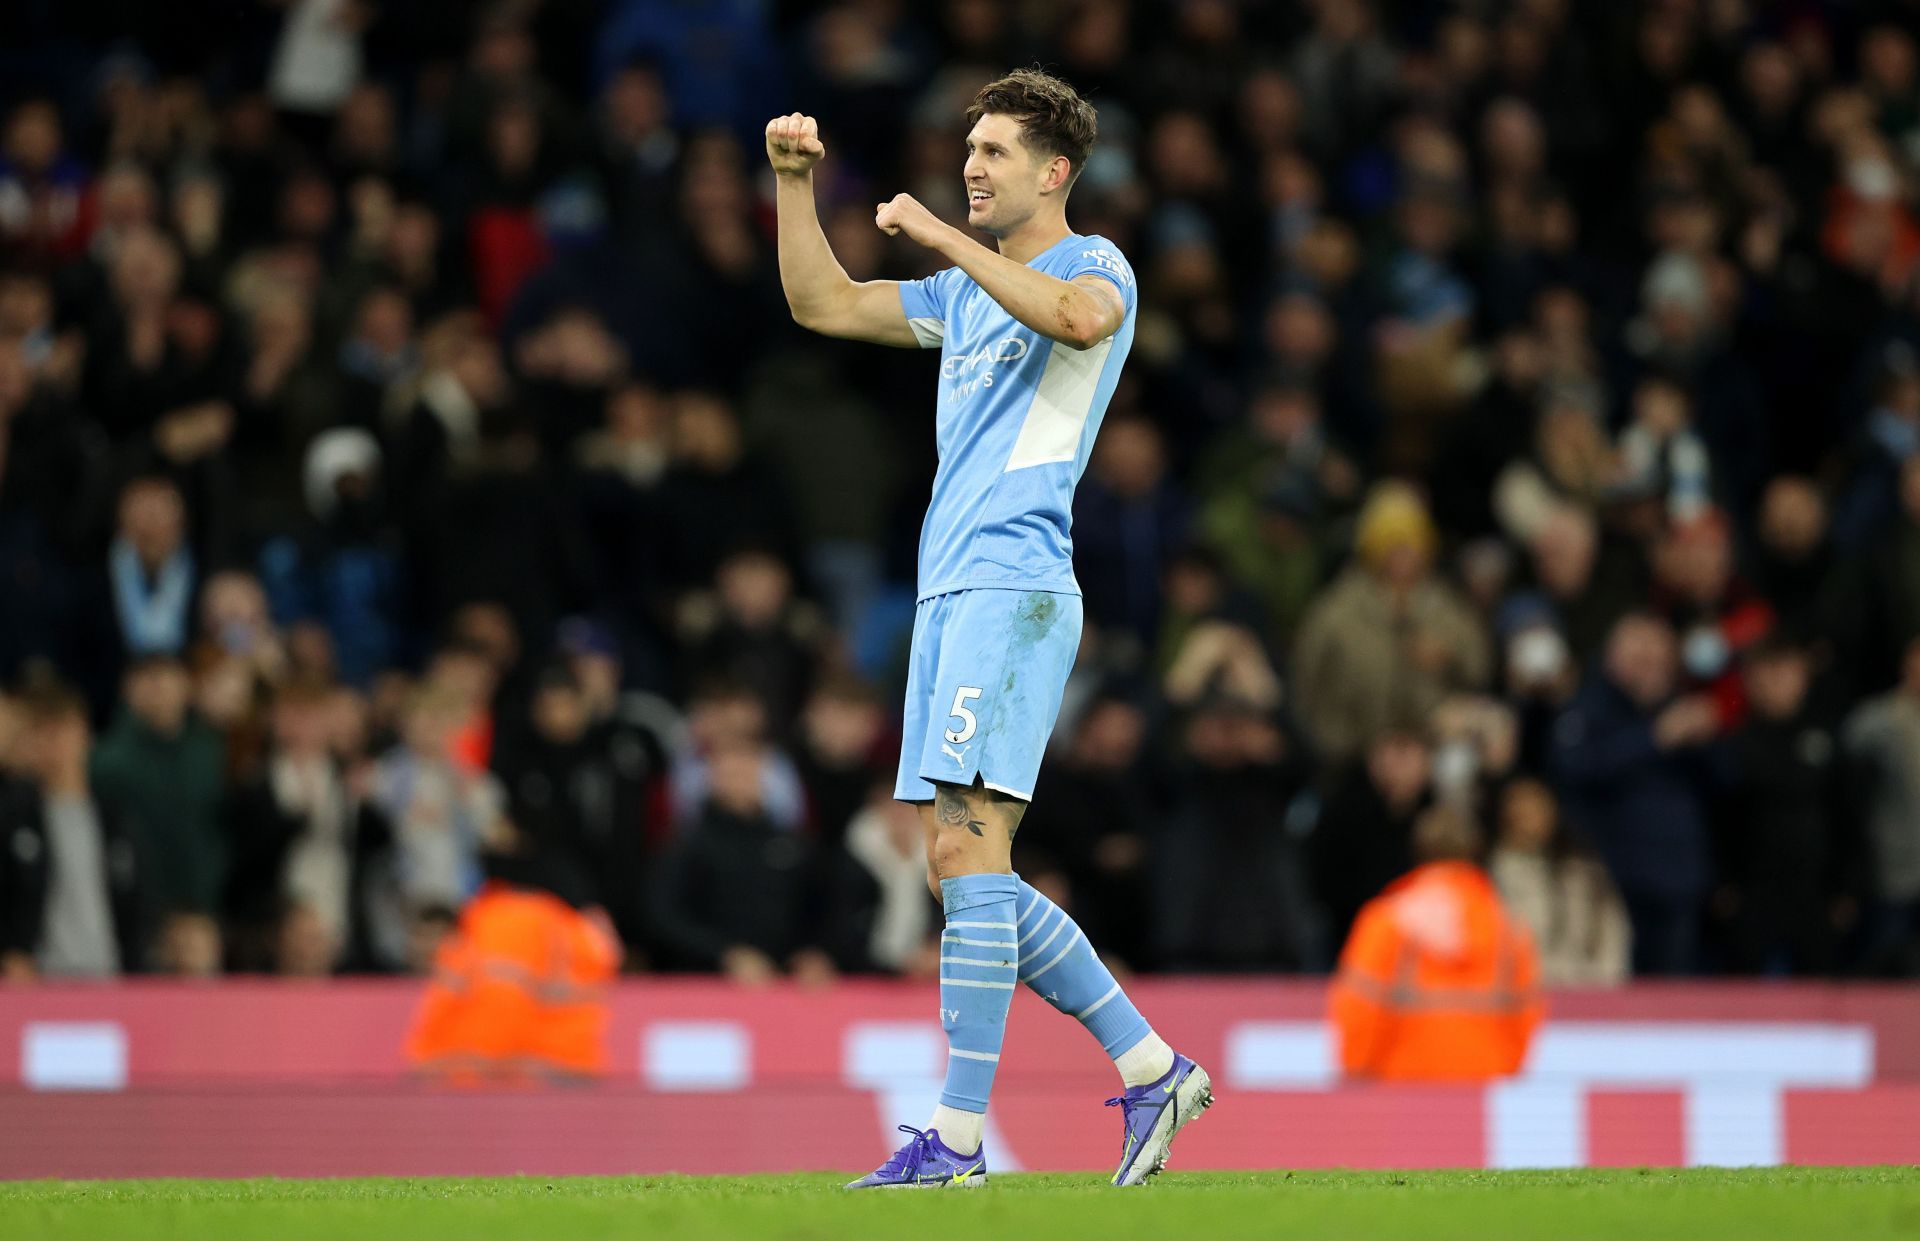 John Stones have made five starts in the Premier League this season